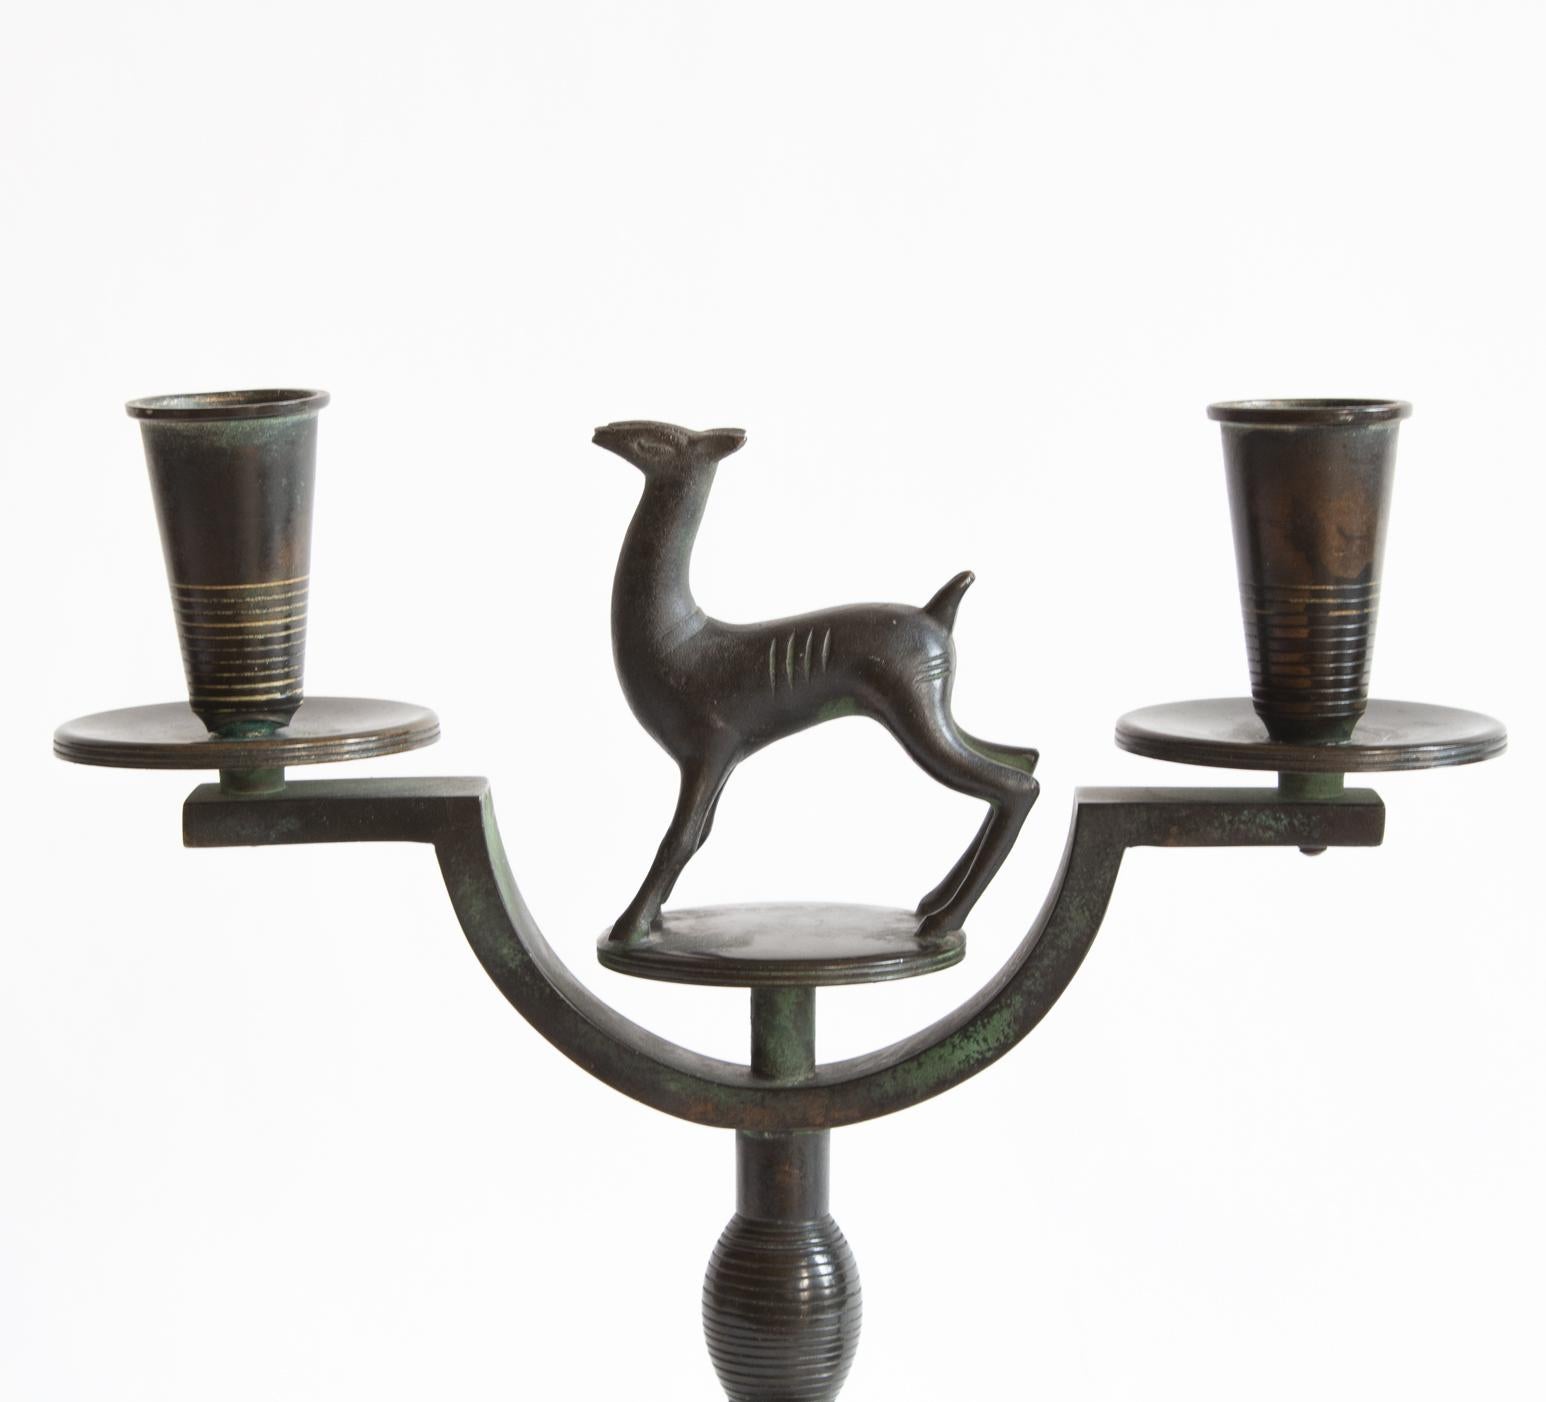 Molded Art Deco Pair of Signed Swedish Modern Candelabras by Nils Fougstedt in Bronze